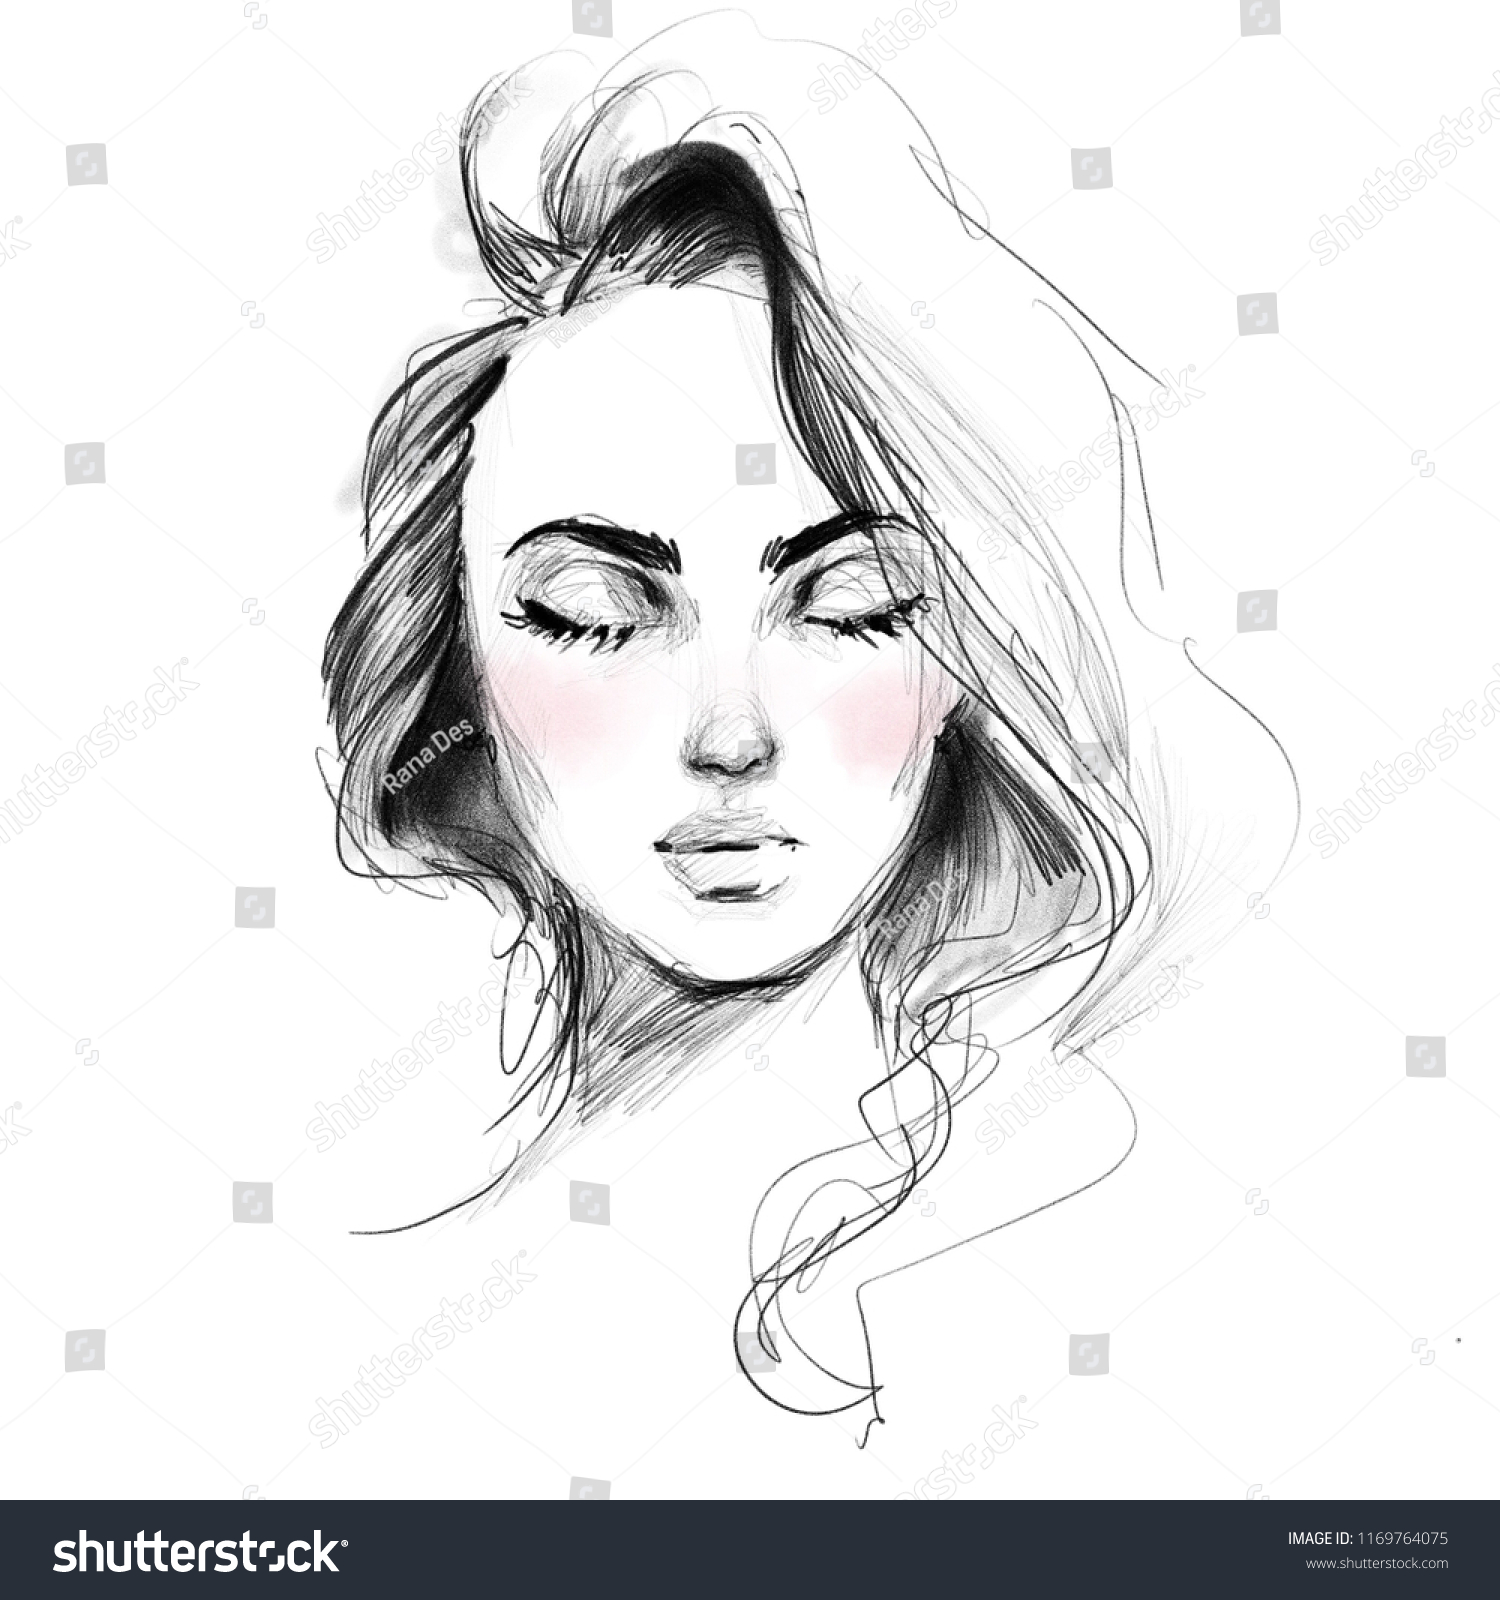 Pencil drawing of girls Images, Stock Photos & Vectors | Shutterstock